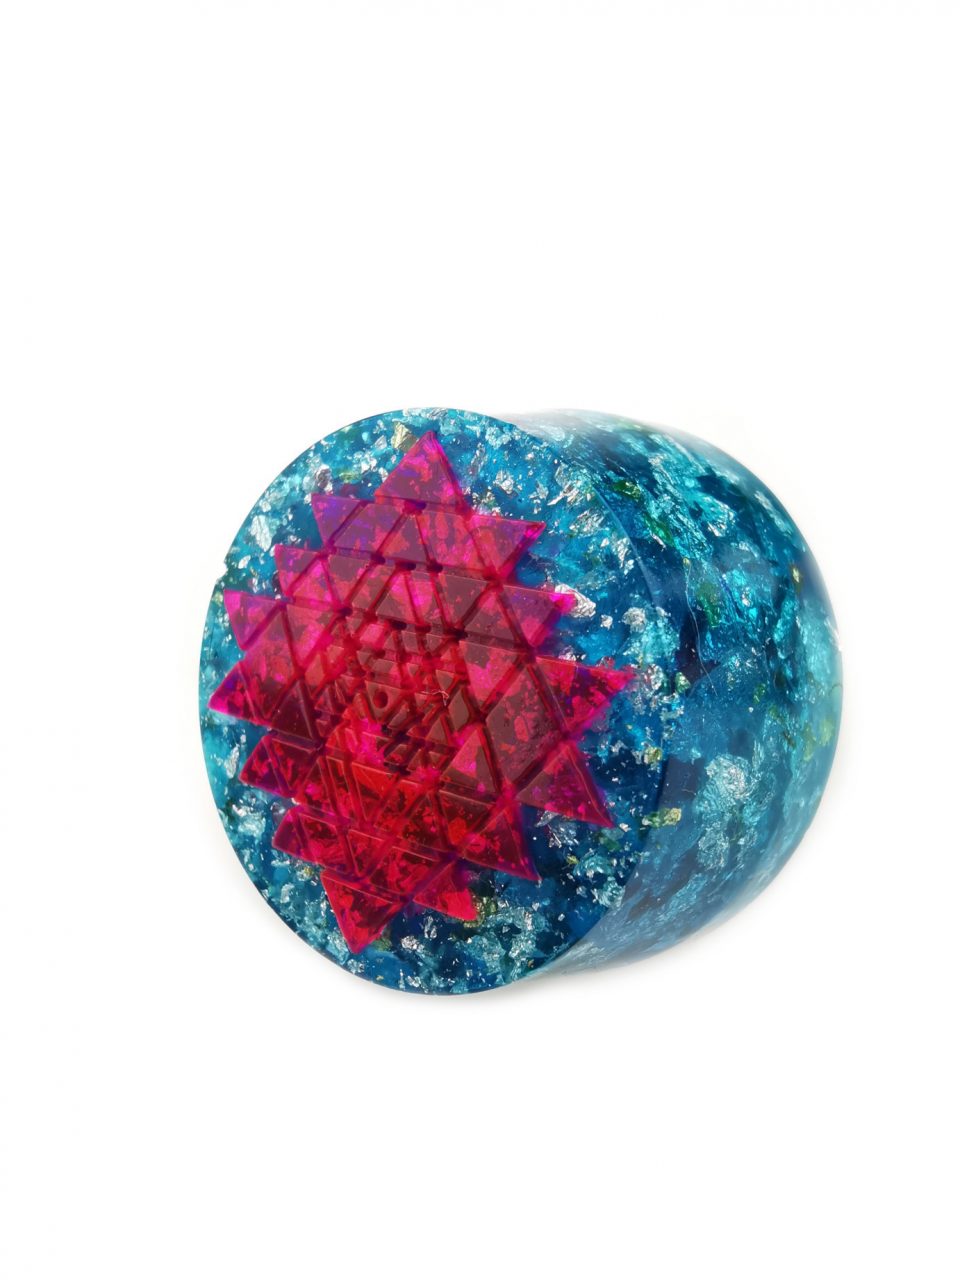 Sri Yantra Orgone Puck in Pink and Blue by OrgoneVibes